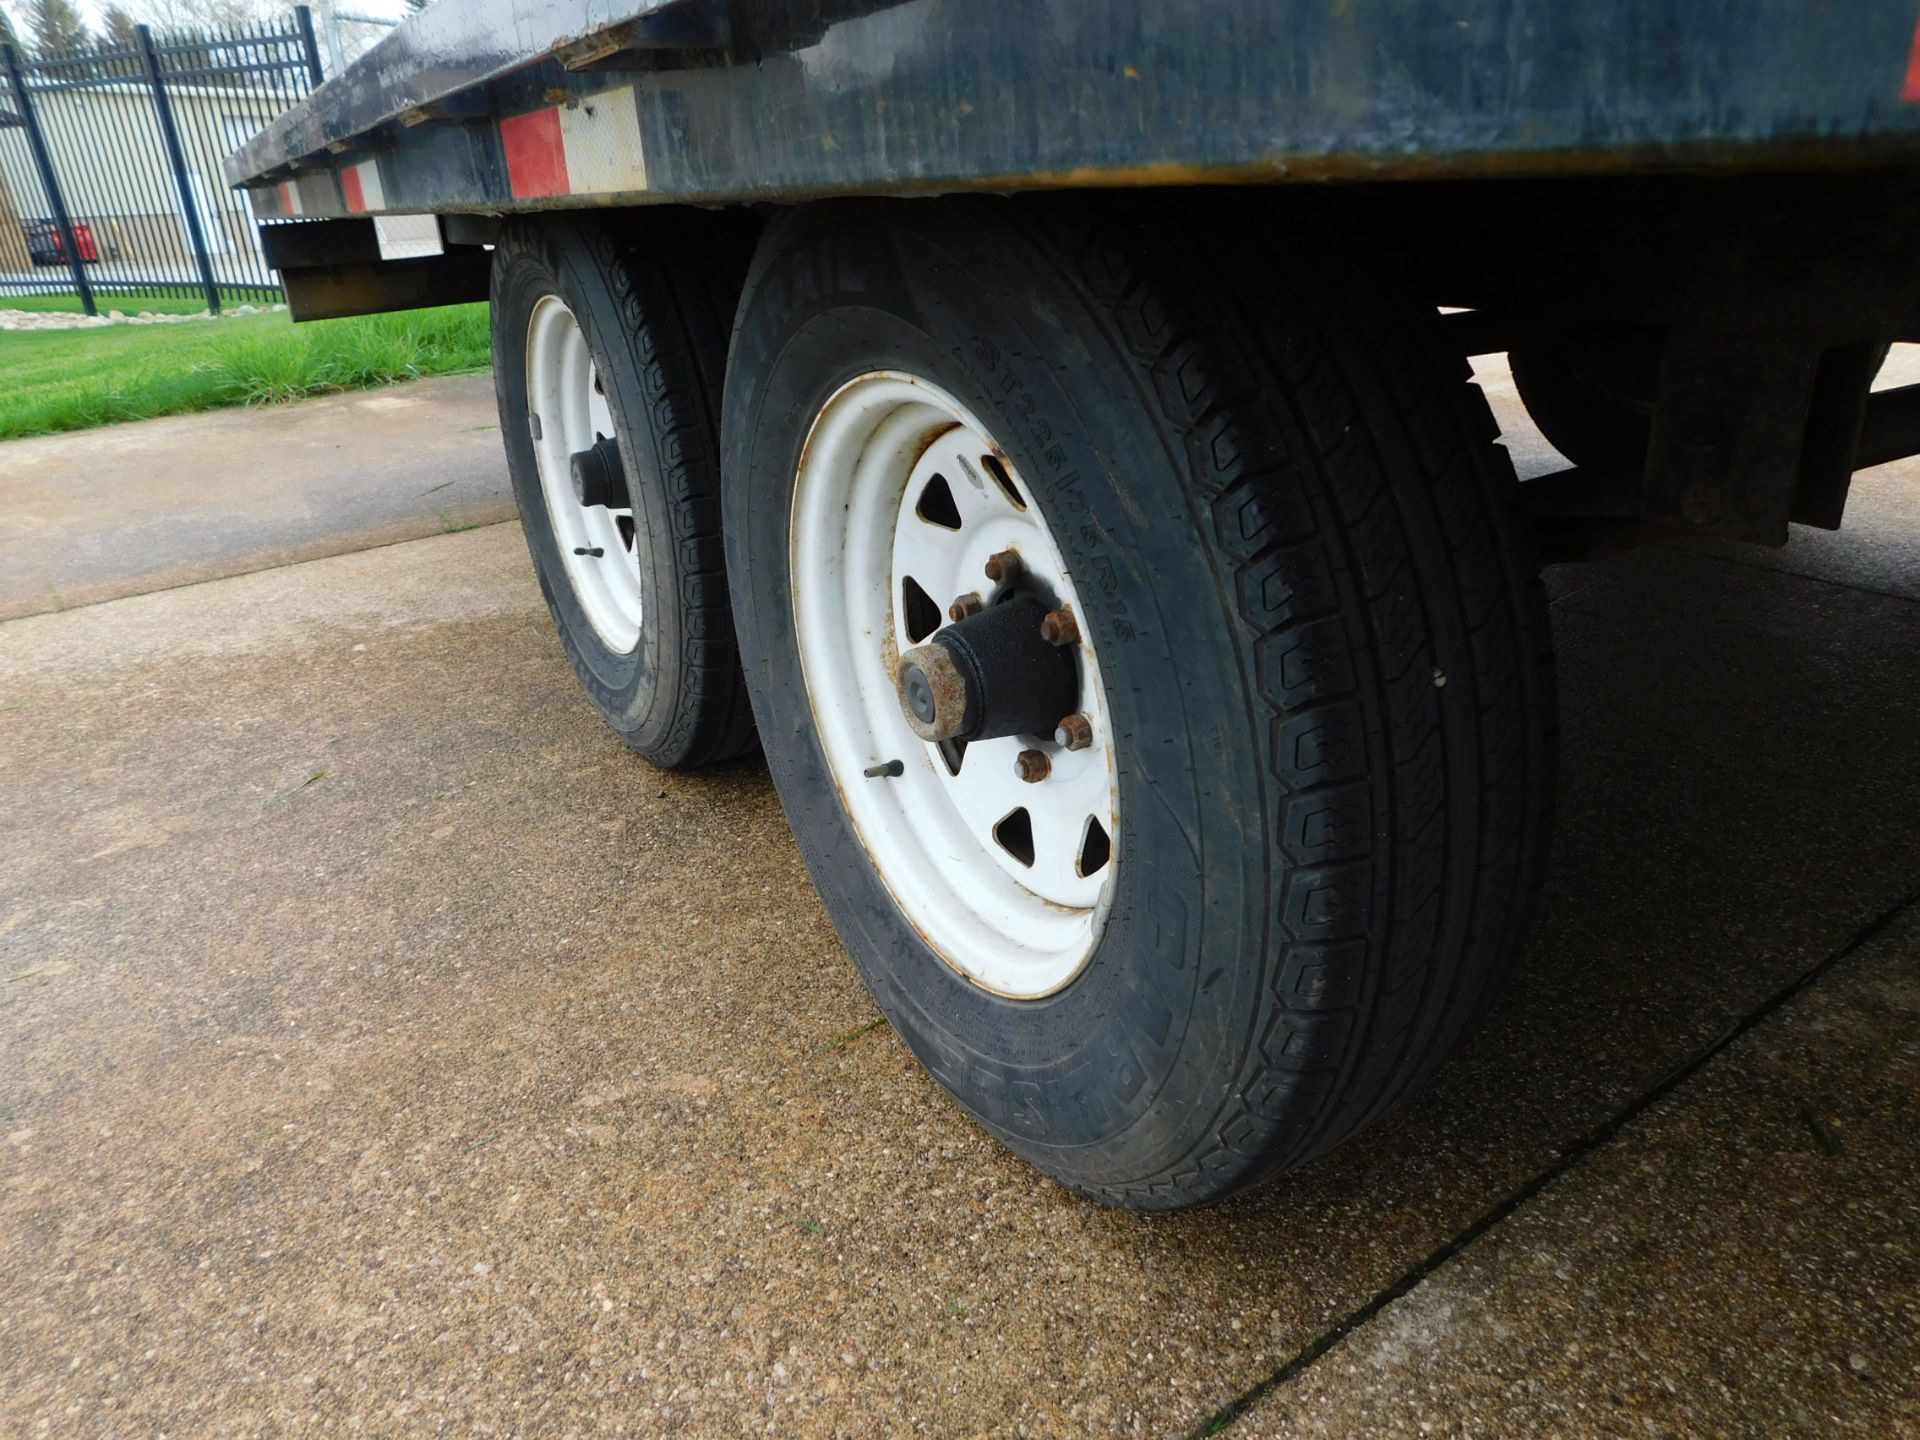 Sure-Trac Tandem Axle 20' Deck Over Trailer, Wood Deck, 102" Wide, D-Rings and Chain Rail - Image 6 of 15